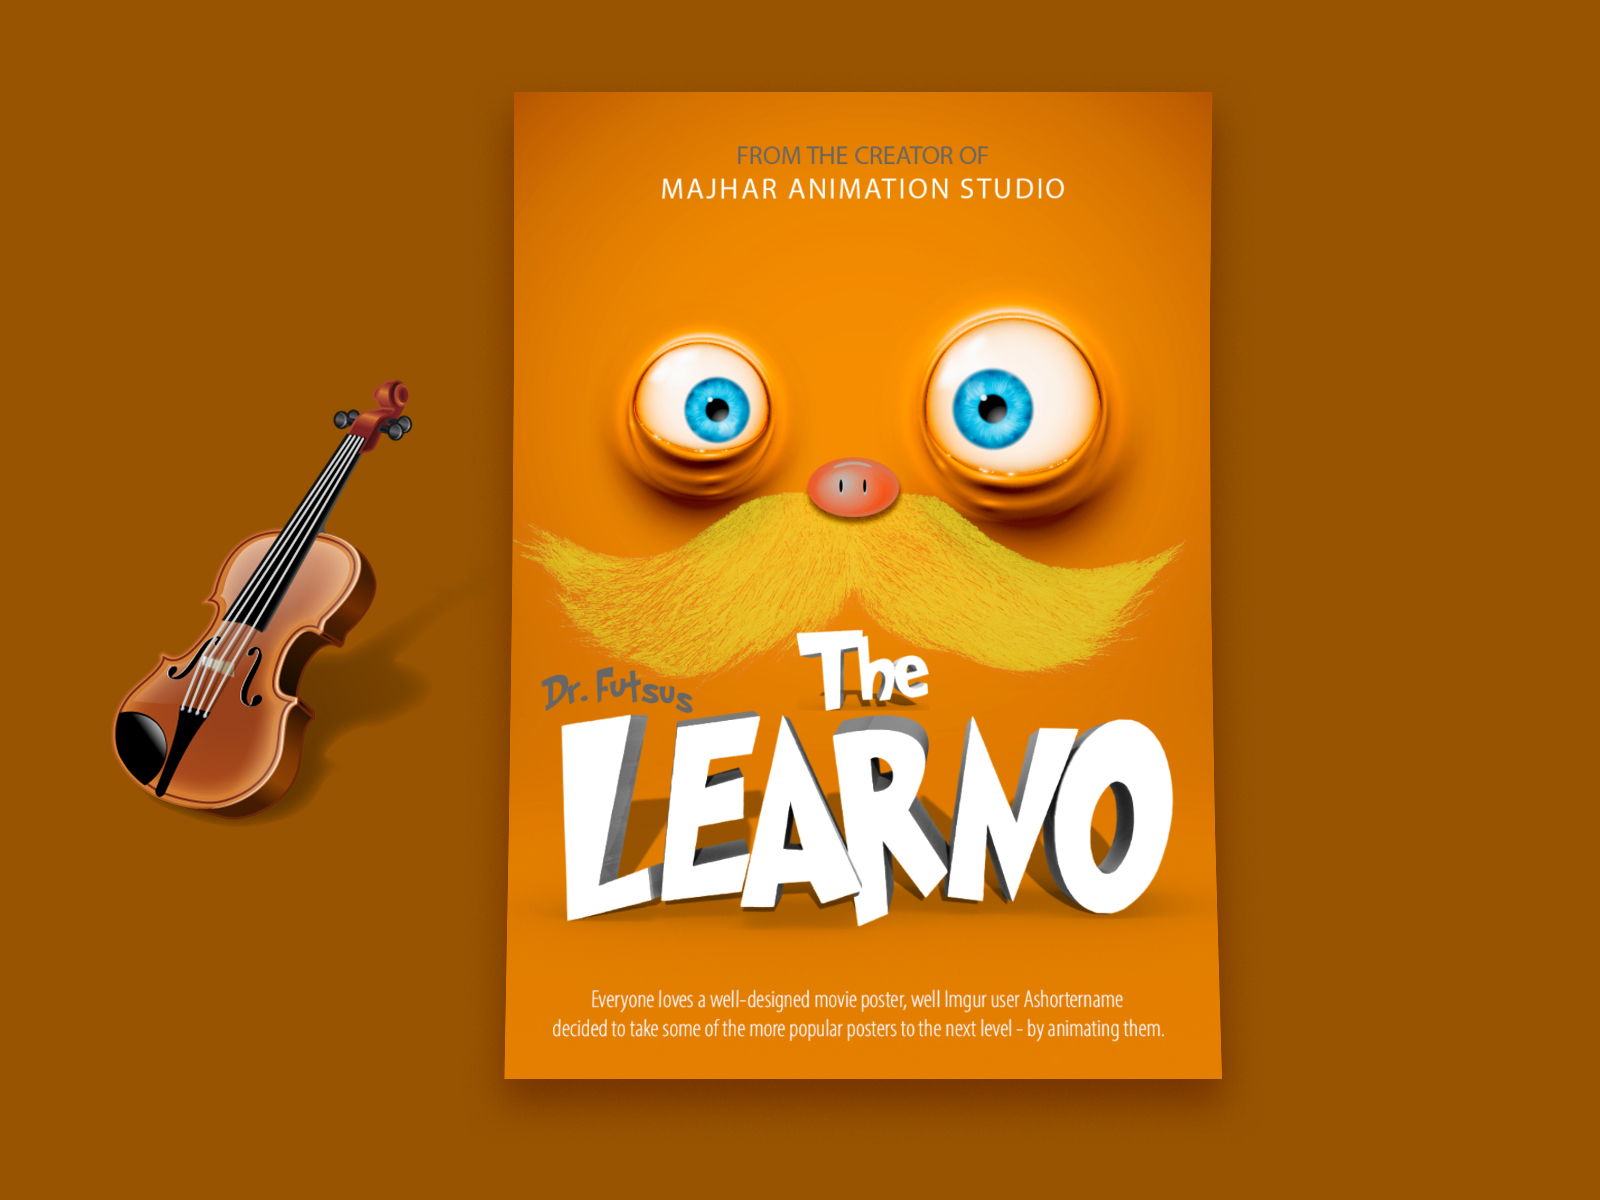 3d Animation Movie Poster by Majharul Islam on Dribbble